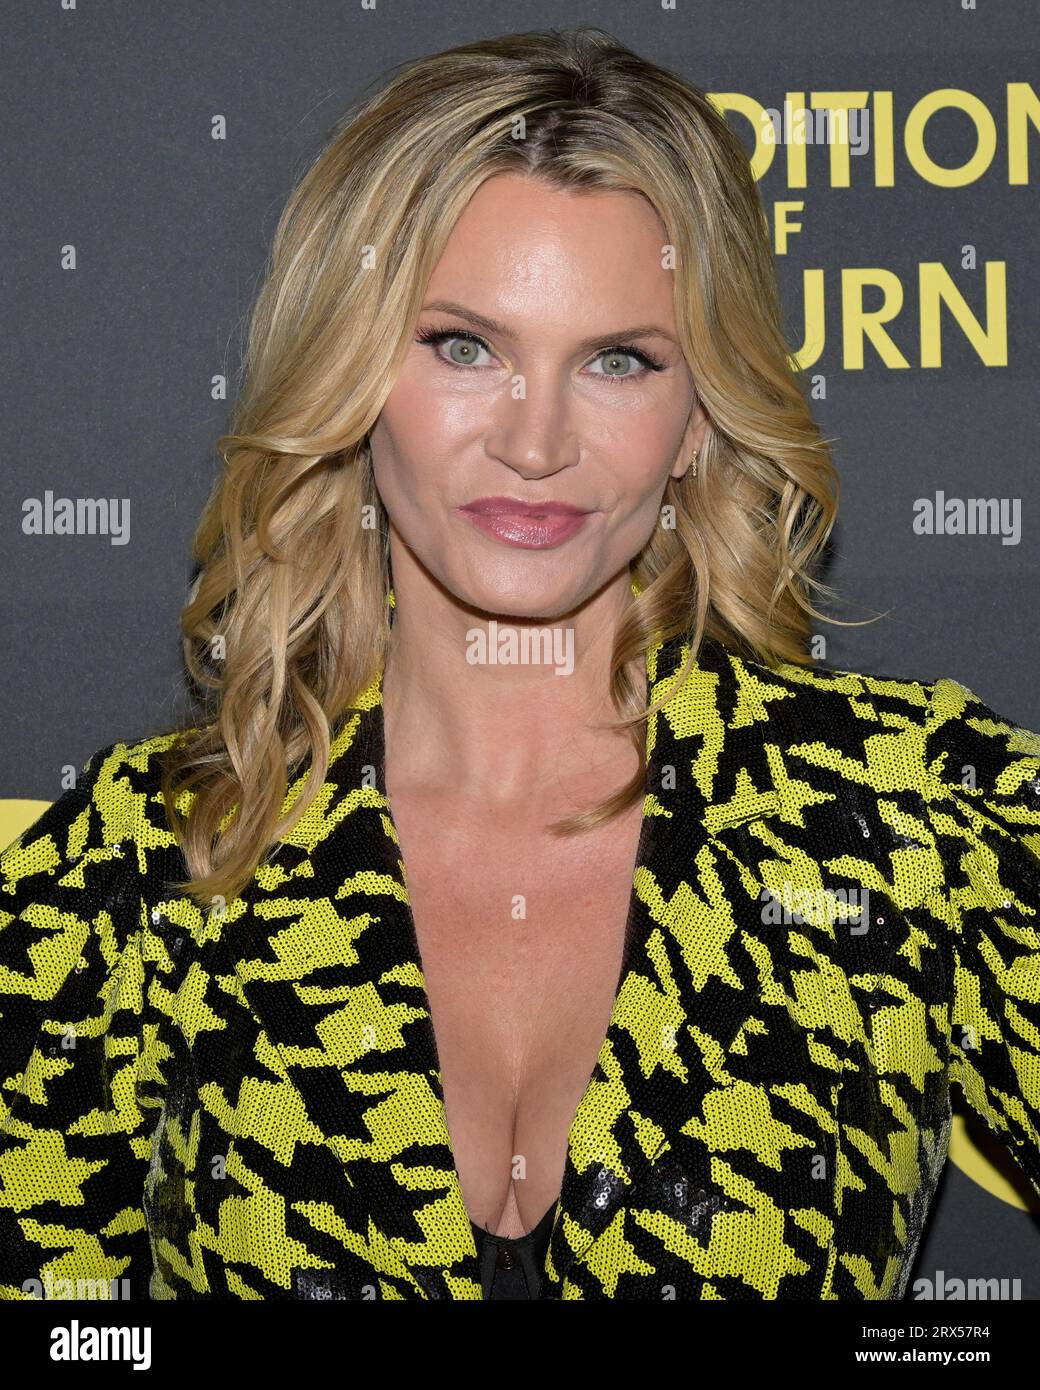 September 22, 2023, Los Angeles, California, United States: Natasha Henstridge attends the Los Angeles Red Carpet Film Premiere for Condition Of Return. (Credit Image: © Billy Bennight/ZUMA Press Wire) EDITORIAL USAGE ONLY! Not for Commercial USAGE! Stock Photo